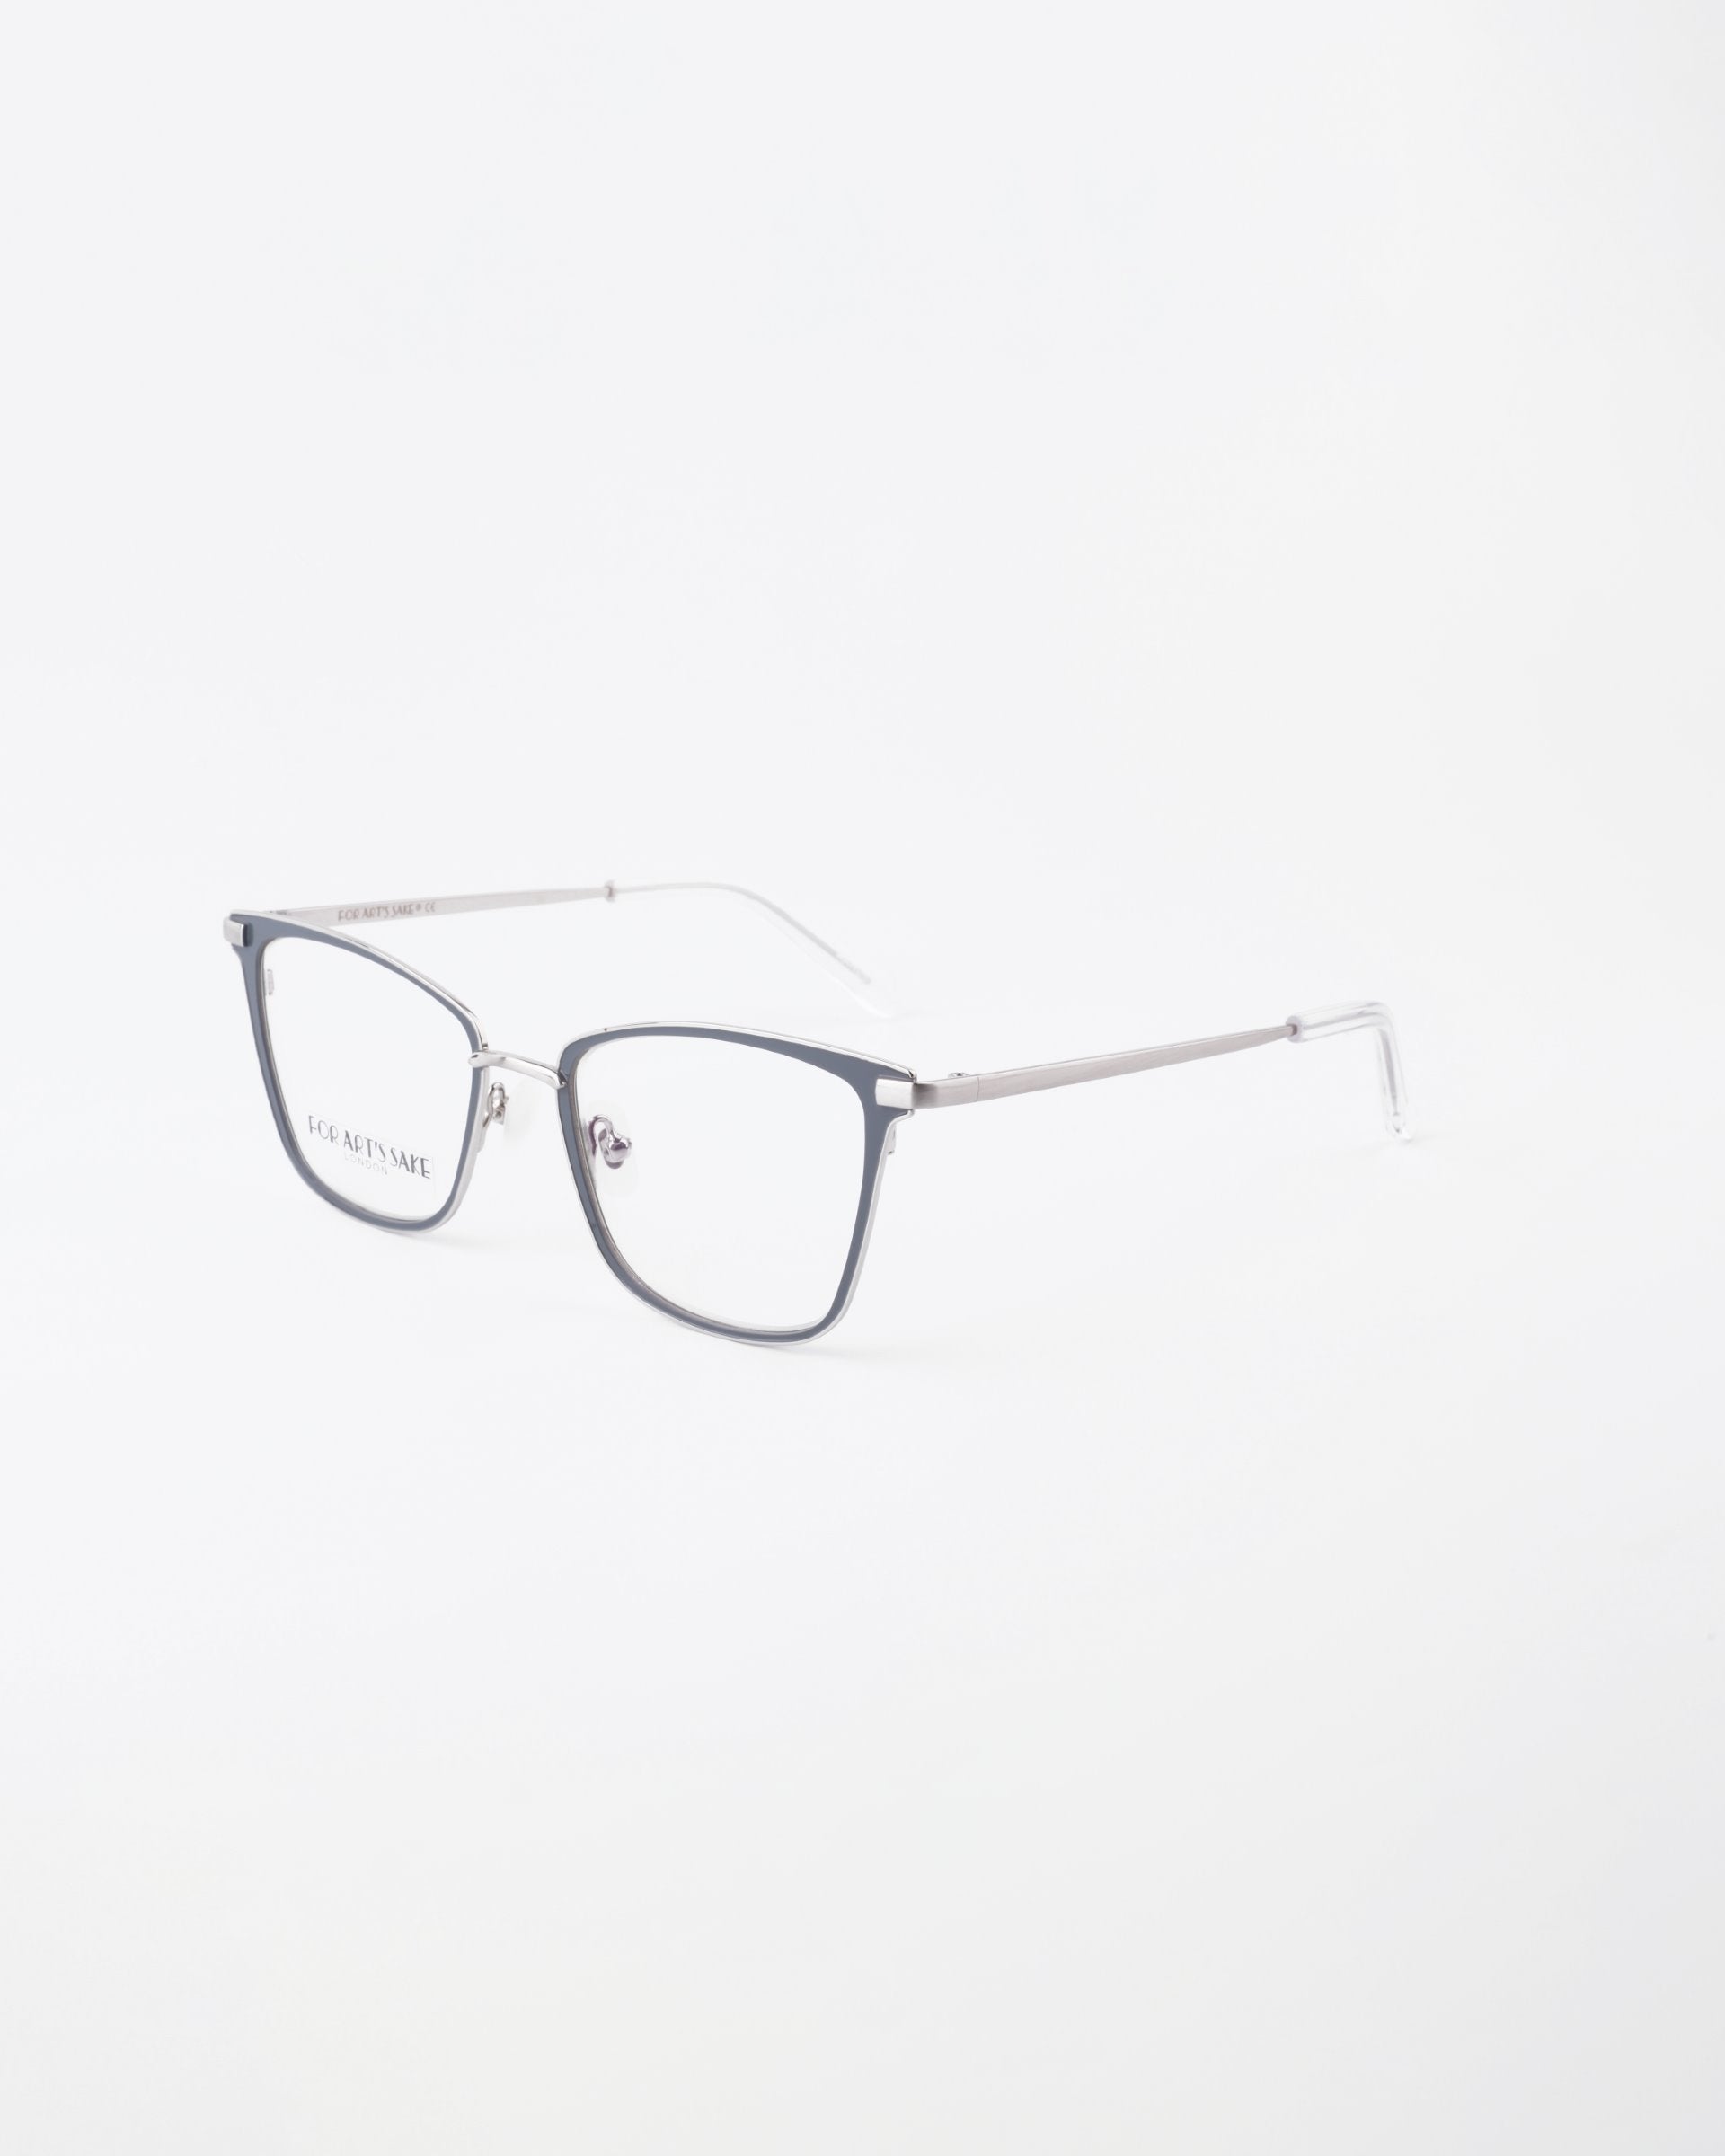 A pair of For Art&#39;s Sake® Windsor eyeglasses with a sleek design. The frame is mostly rimless on the bottom, with metallic arms and a thin bridge connecting the lenses. The temples are straight with a transparent section at the tips. The lenses are clear and feature a blue light filter for added protection.